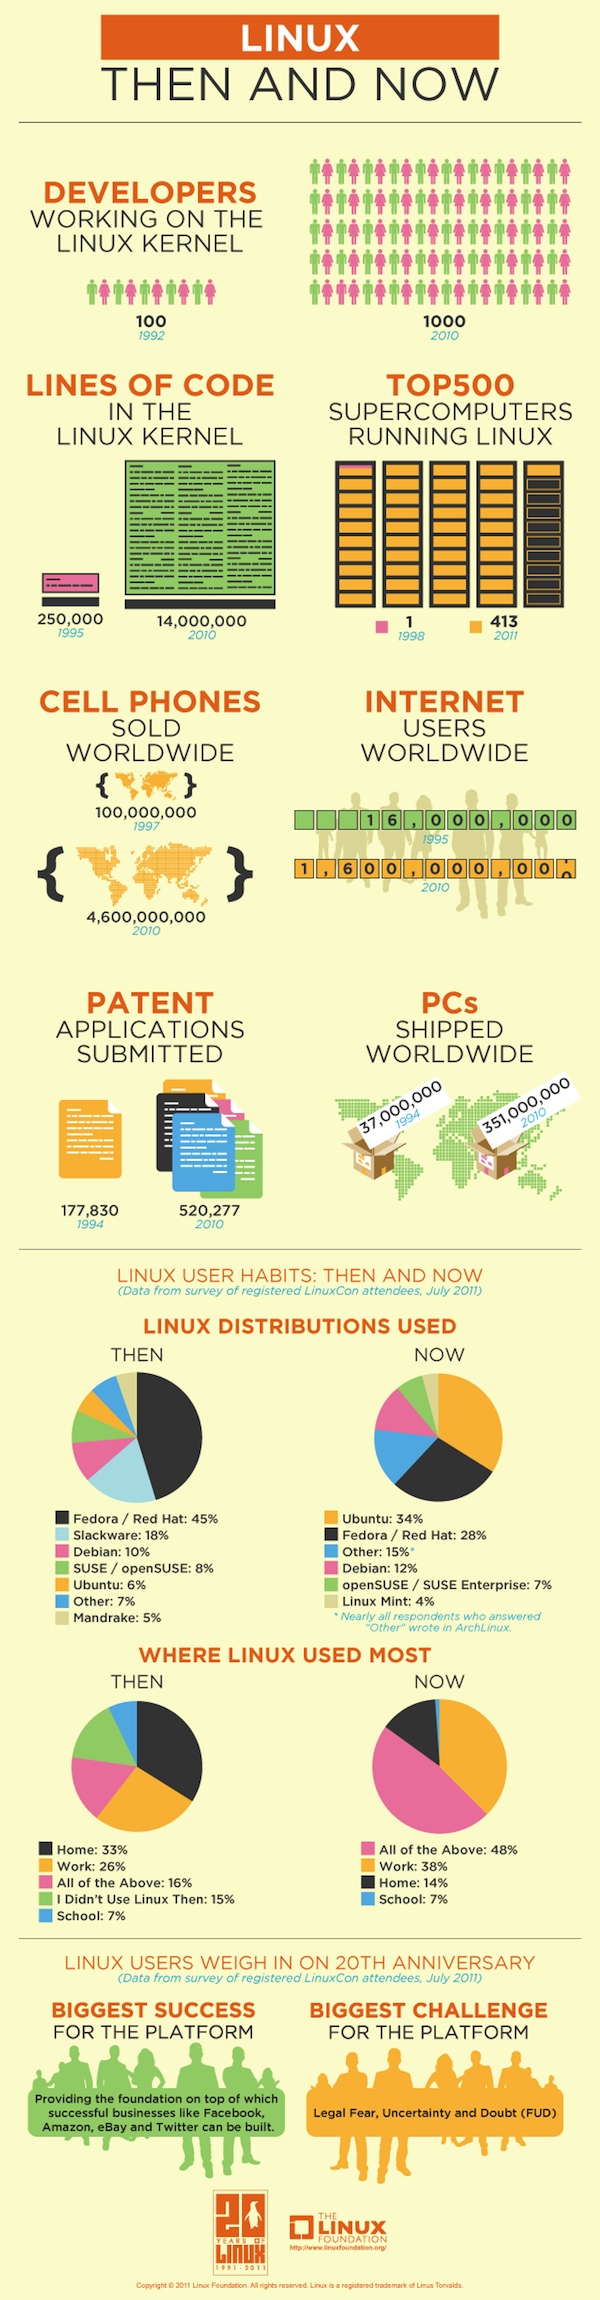 Linux - Then And Now Infographic